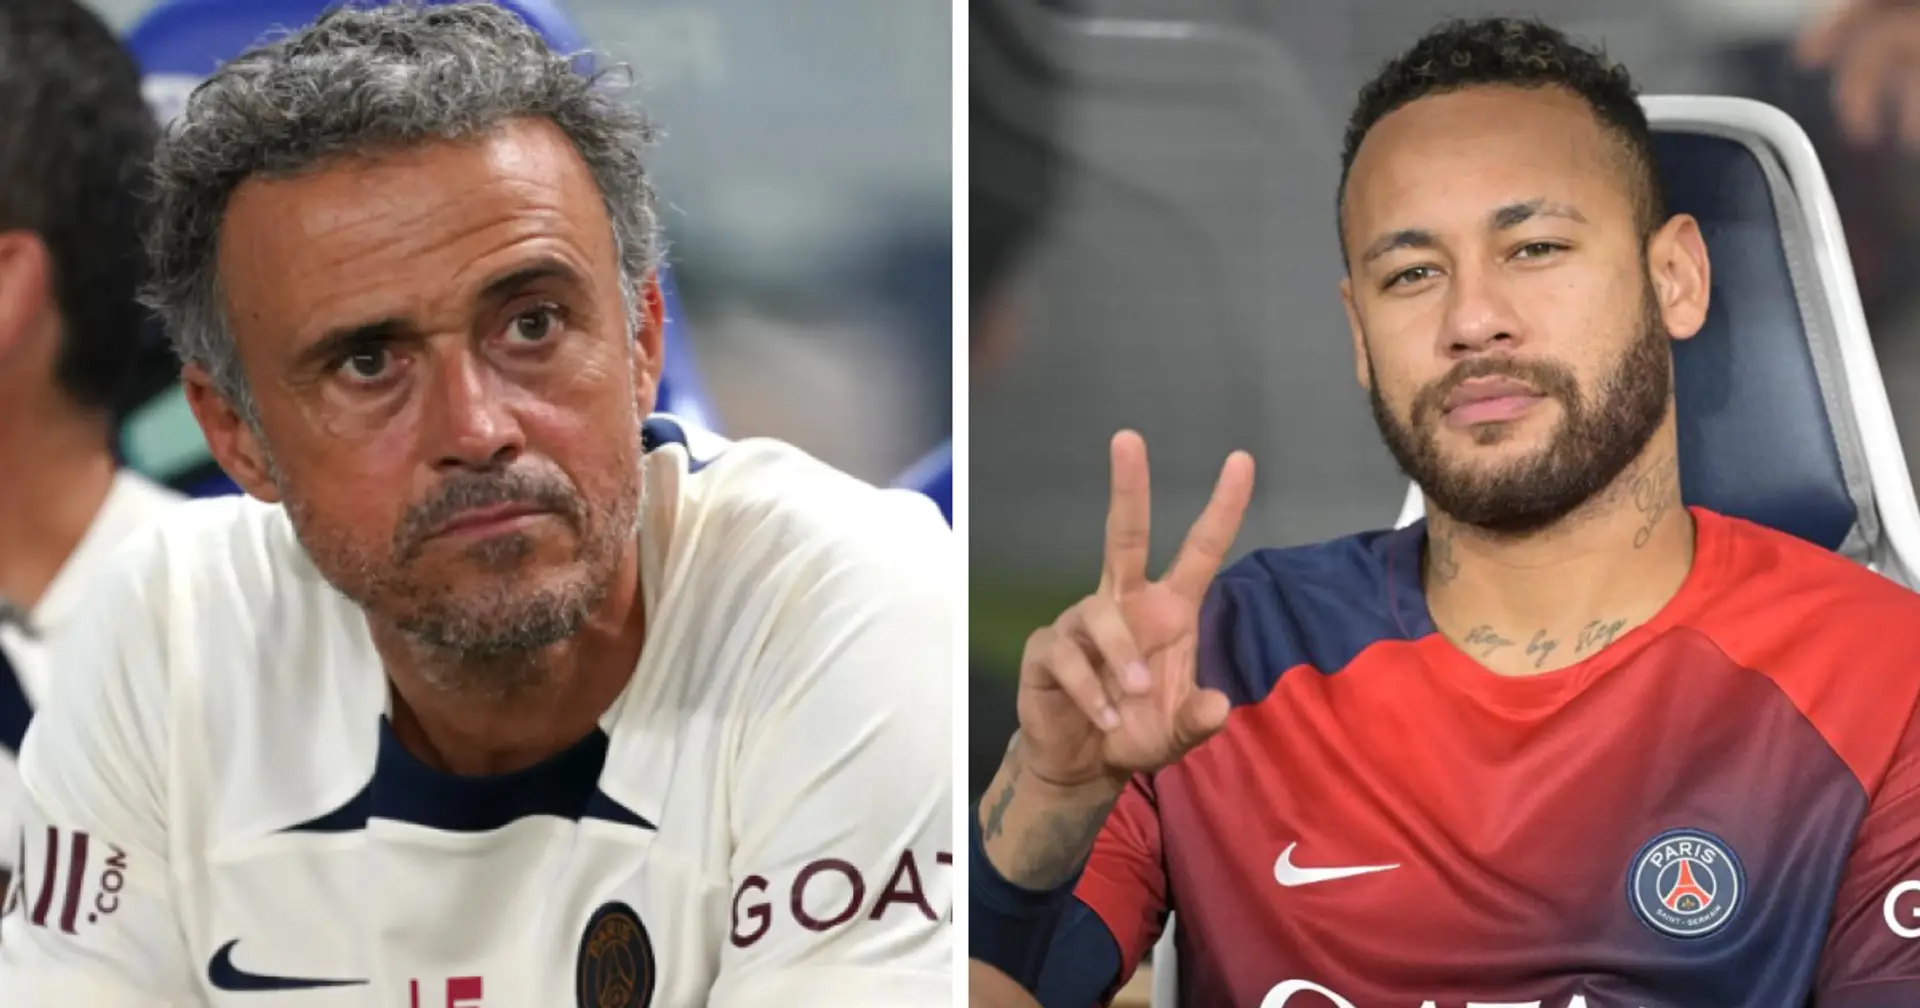 Luis Enrique informs Neymar he's not wanted at the club